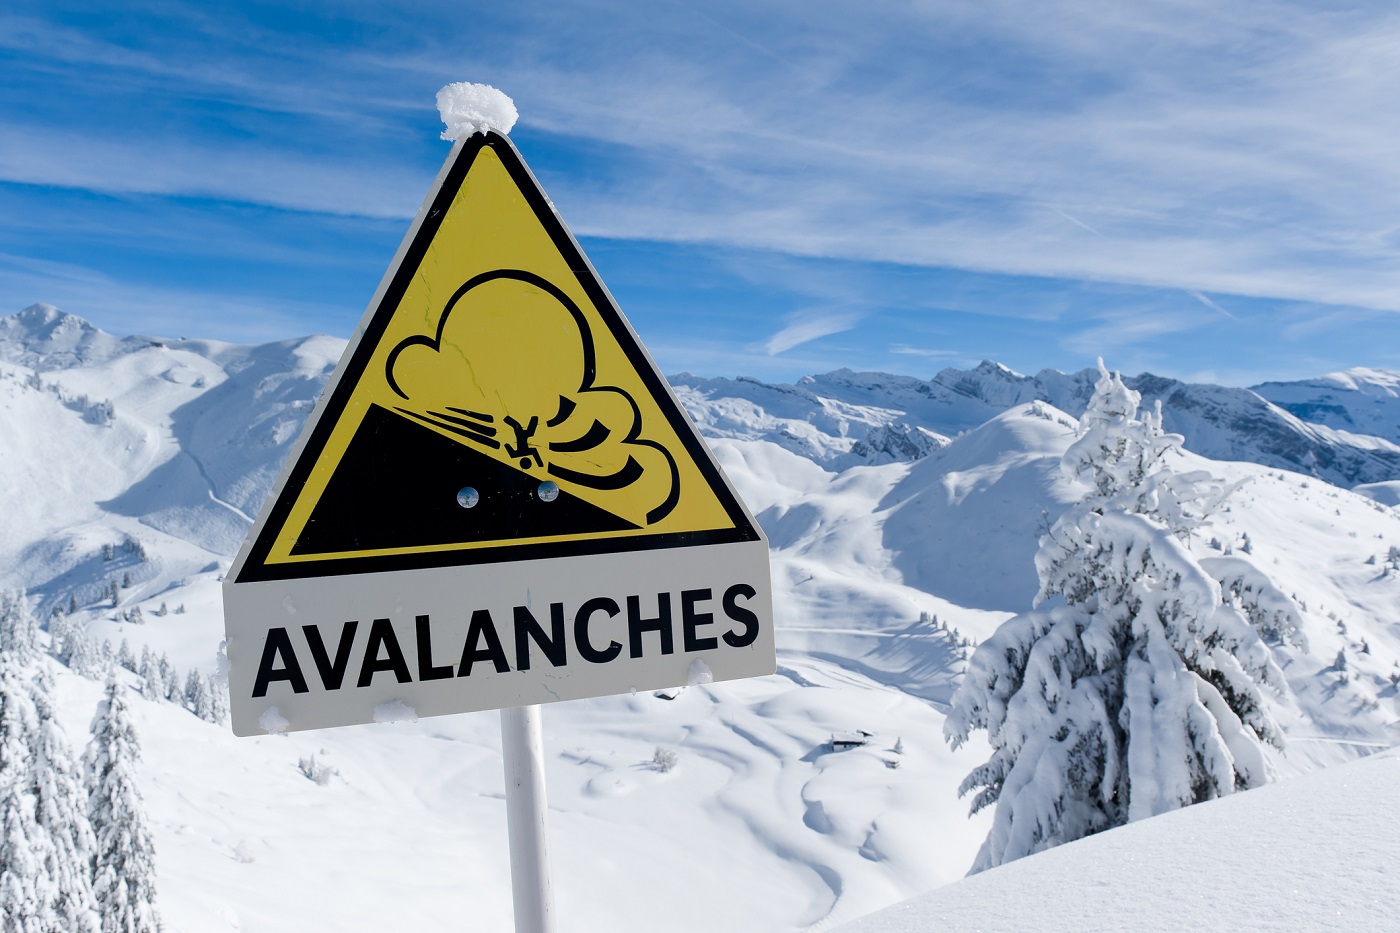 Avalanche sign in winter Alps with snow. One dead and three missing in the Verbier area.